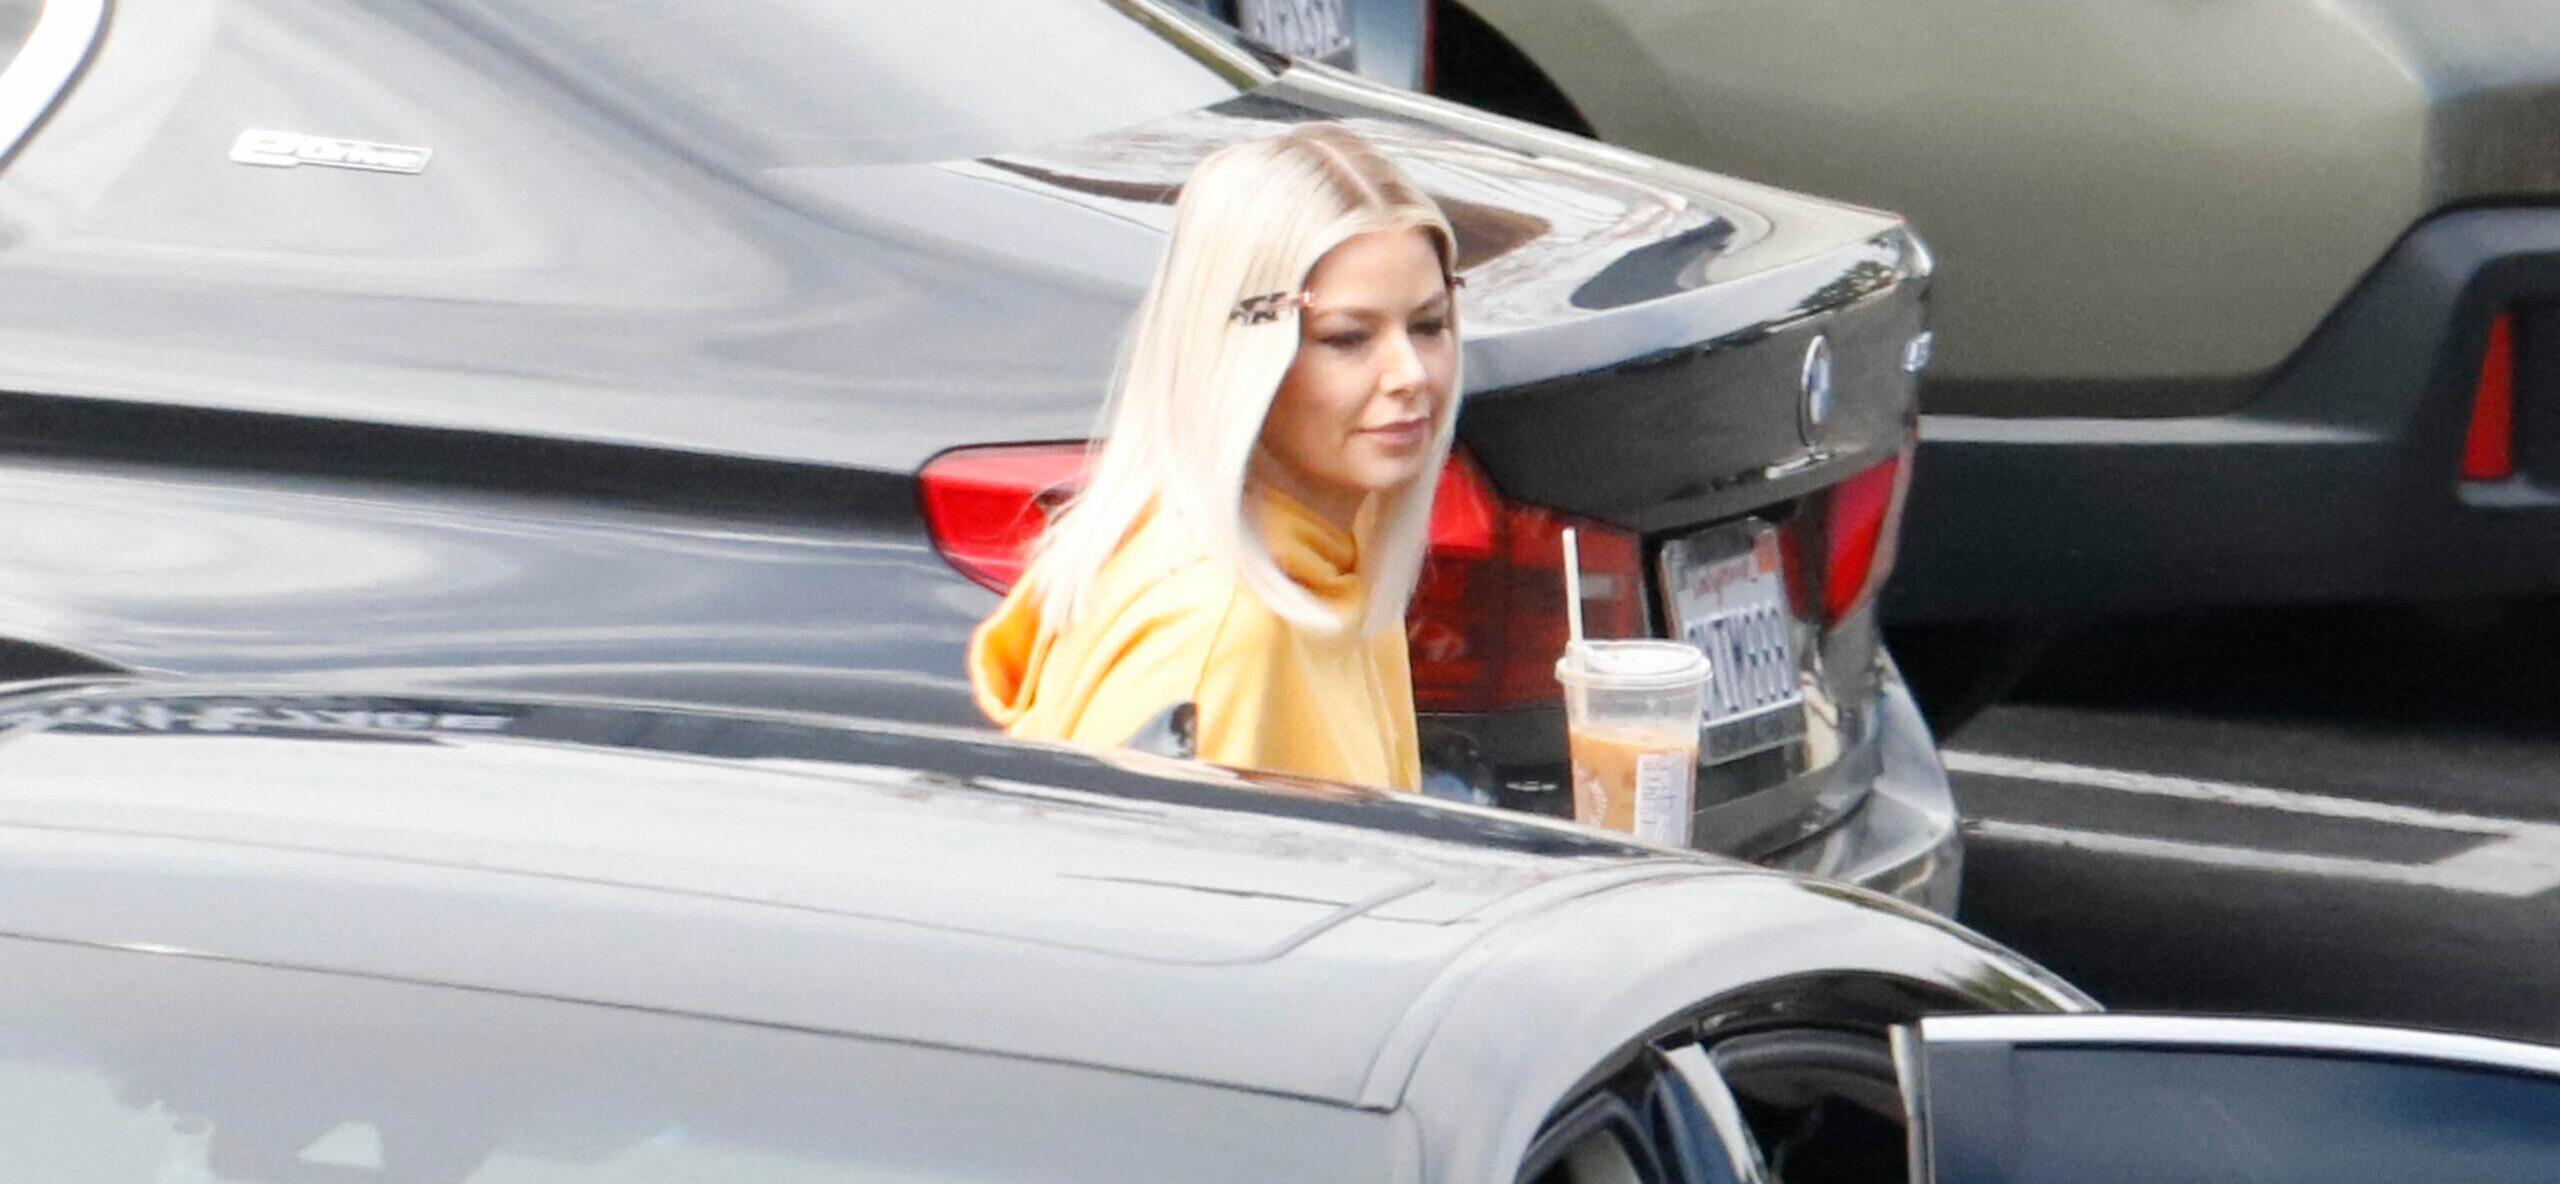 NO TV Ariana Madix Andy Cohen Scheana Shay and Lisa Vanderpump are seen arriving on set to film Vanderpump Rules reunion